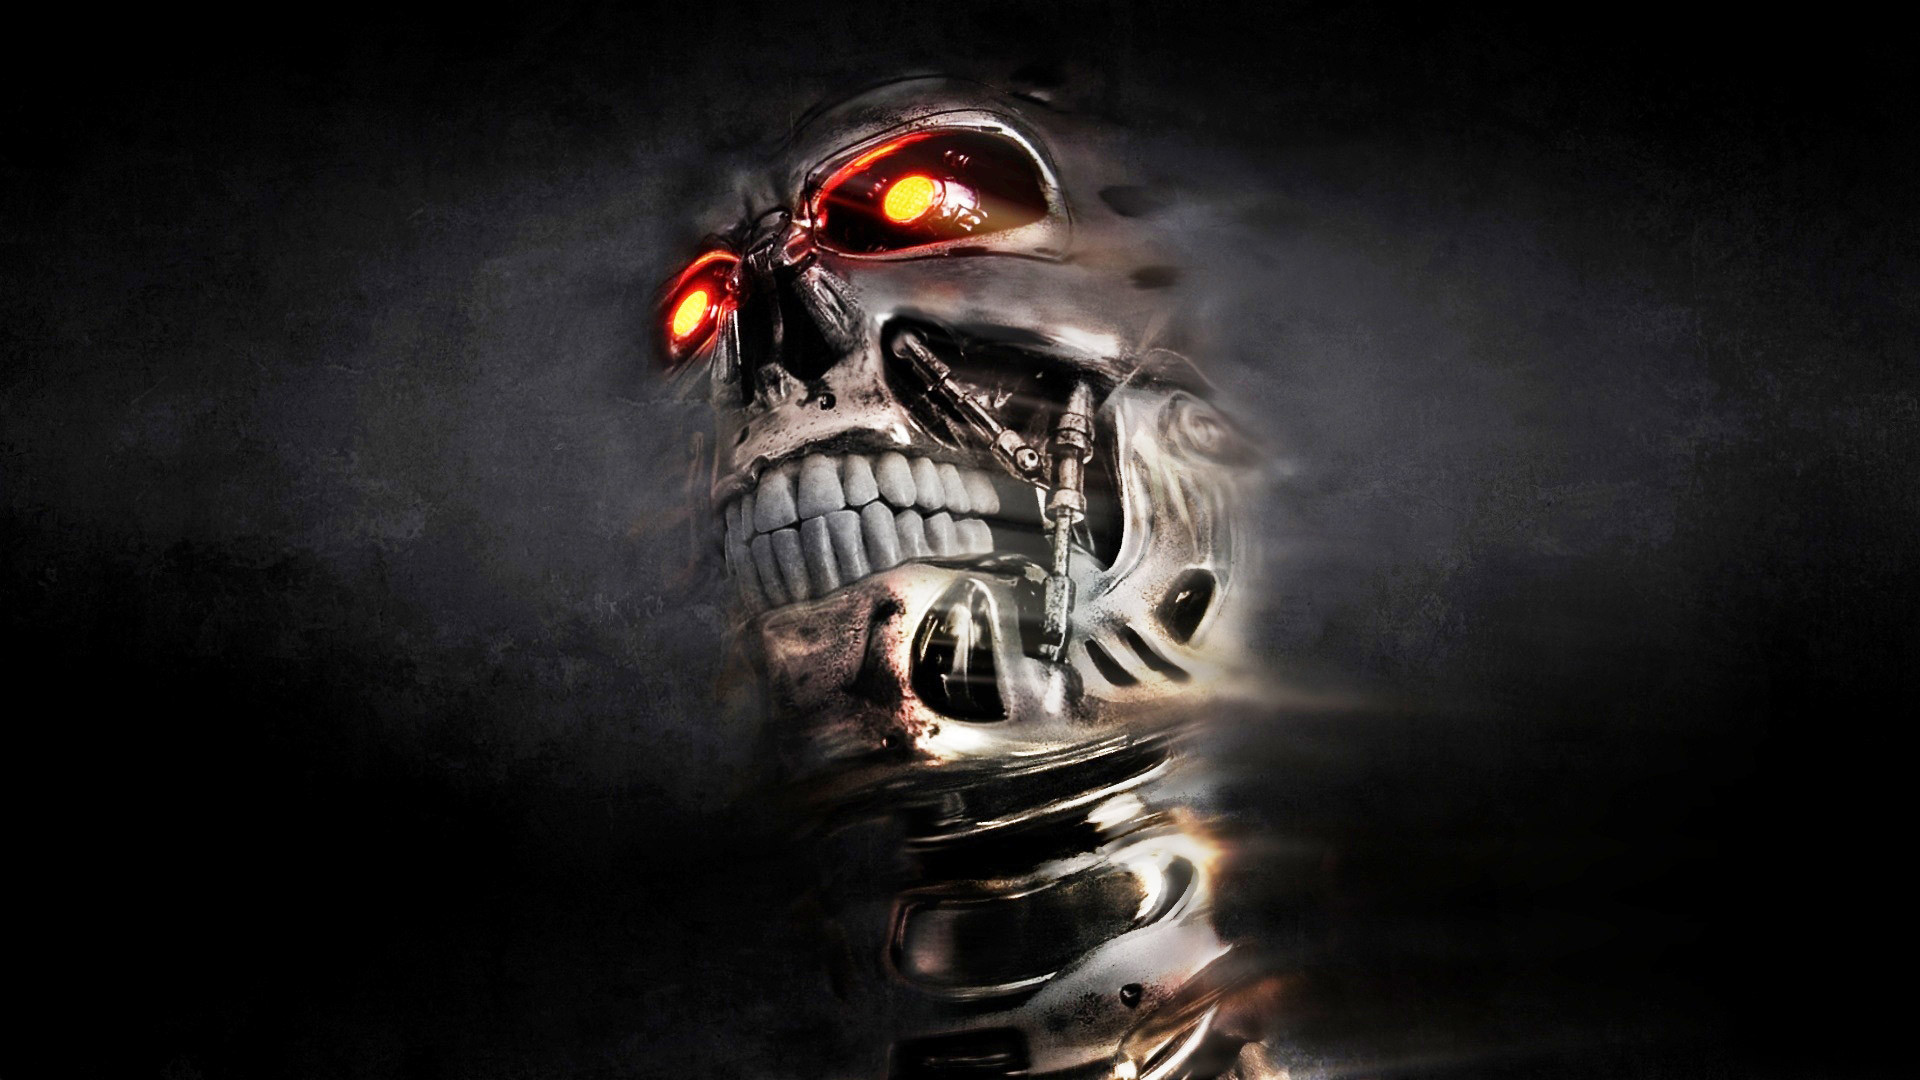 1920x1080 0 3D HD Wallpapers and Backgrounds 3D Skull HD Wallpapers HD Wallpapers